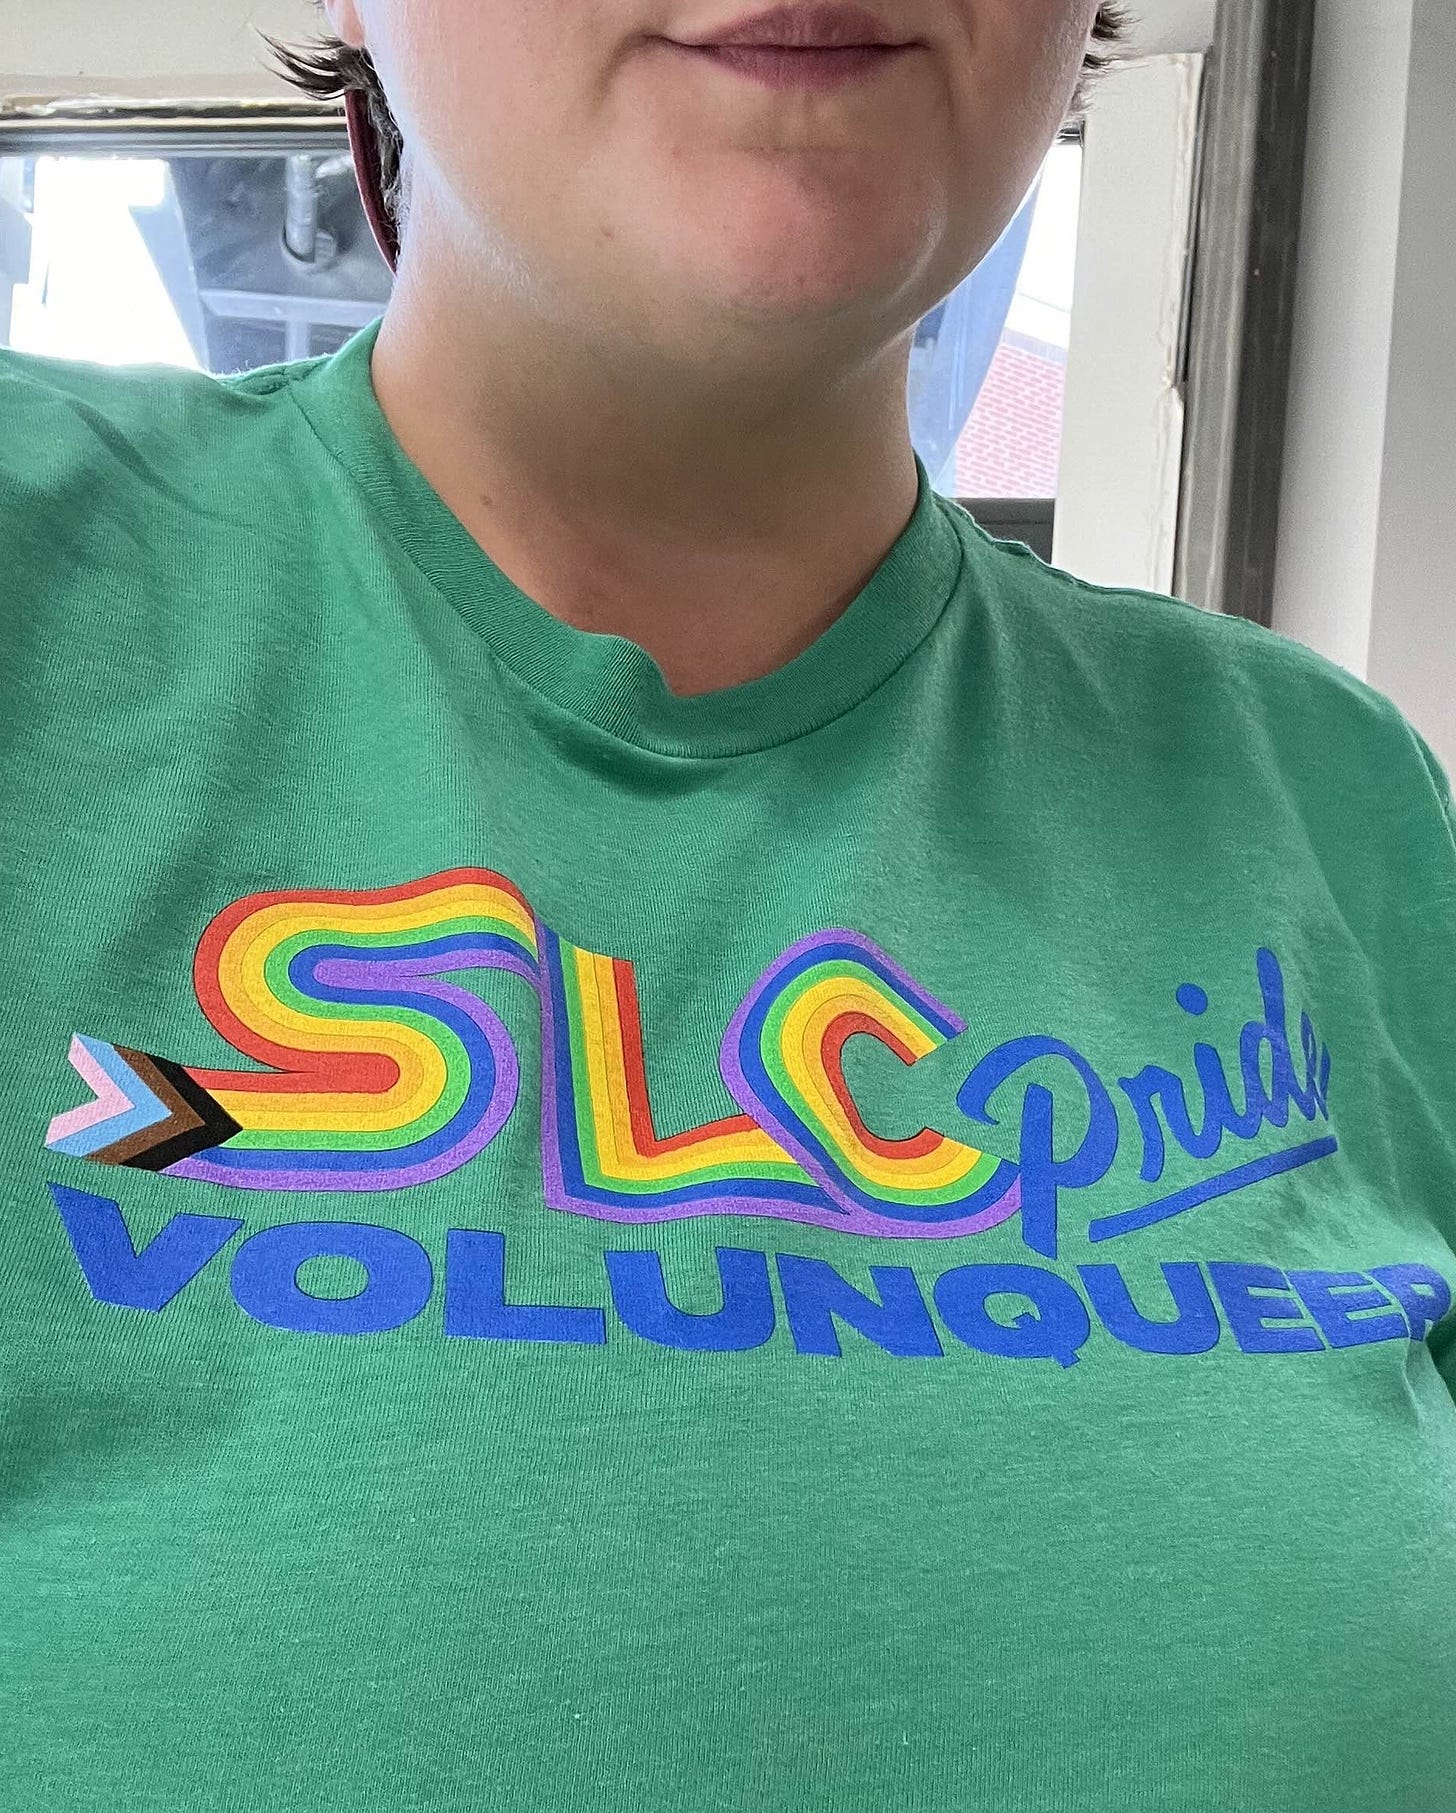 mayson wears a green tee shirt with the slc pride rainbow logo and the word volunqueer in all caps. 